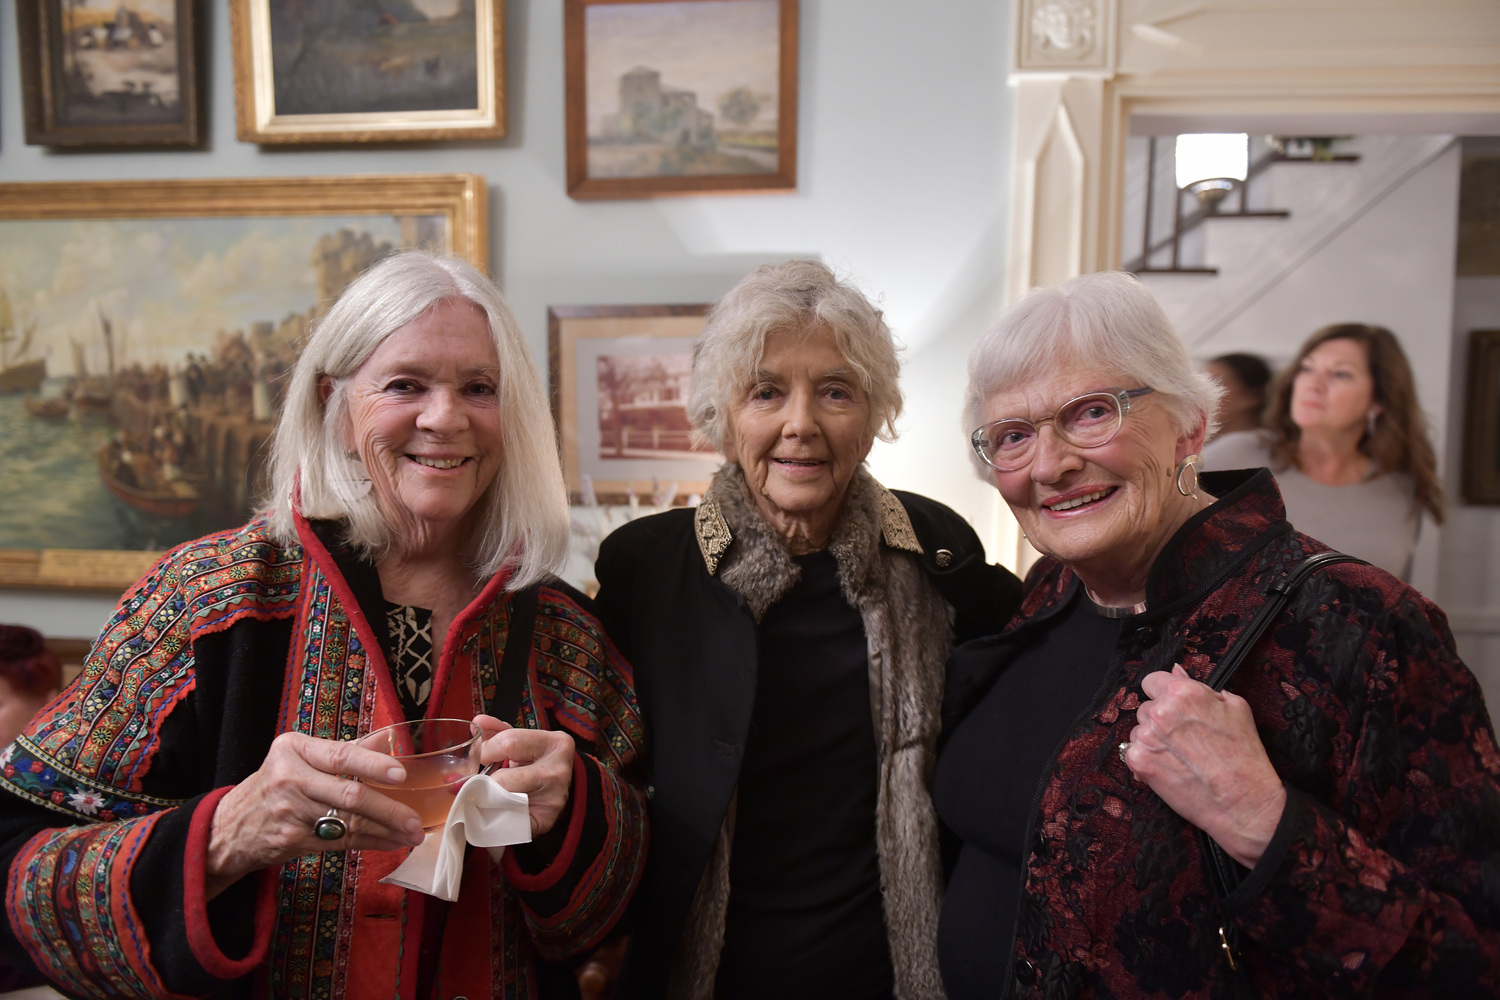 Penny Wright, Mary Cummings and Mary Welker at the Southampton History Museum's Hearthside Cheer and Designer Tree Auction on December 1.  DANA SHAW